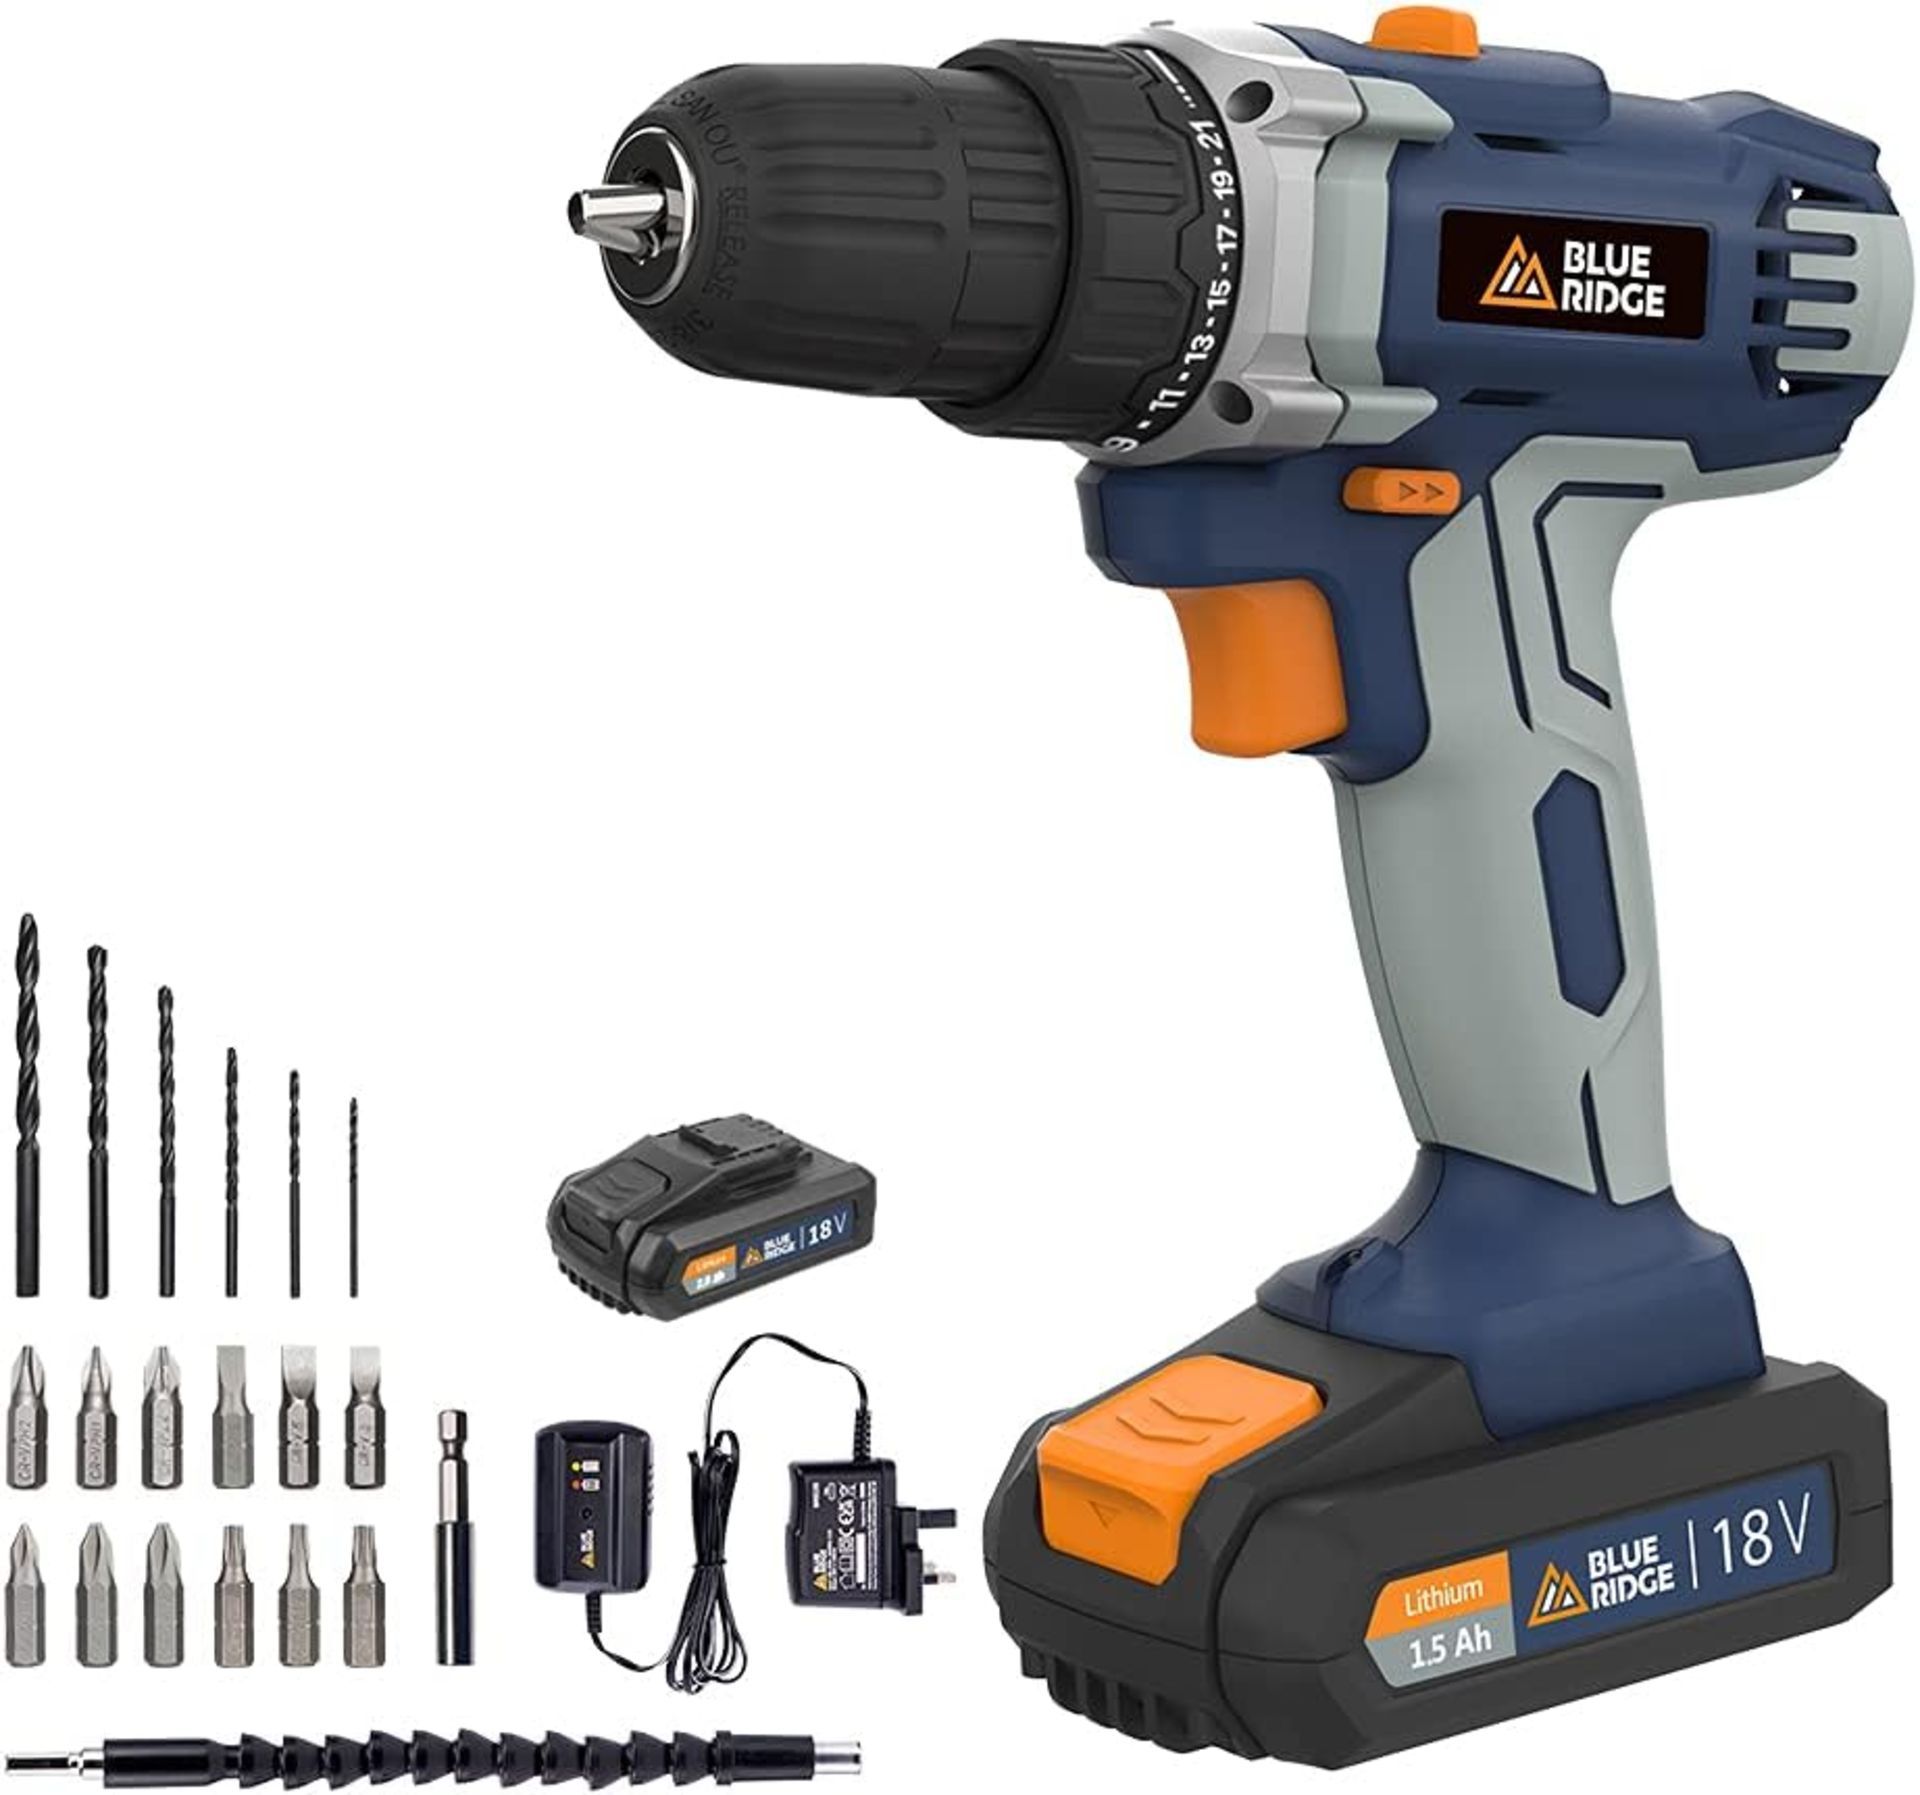 TRADE OT TO CONTAIN 20x NEW & BOXED BLUE RIDGE 18V Cordless Drill Driver. RRP £89 EACH. The - Image 2 of 9